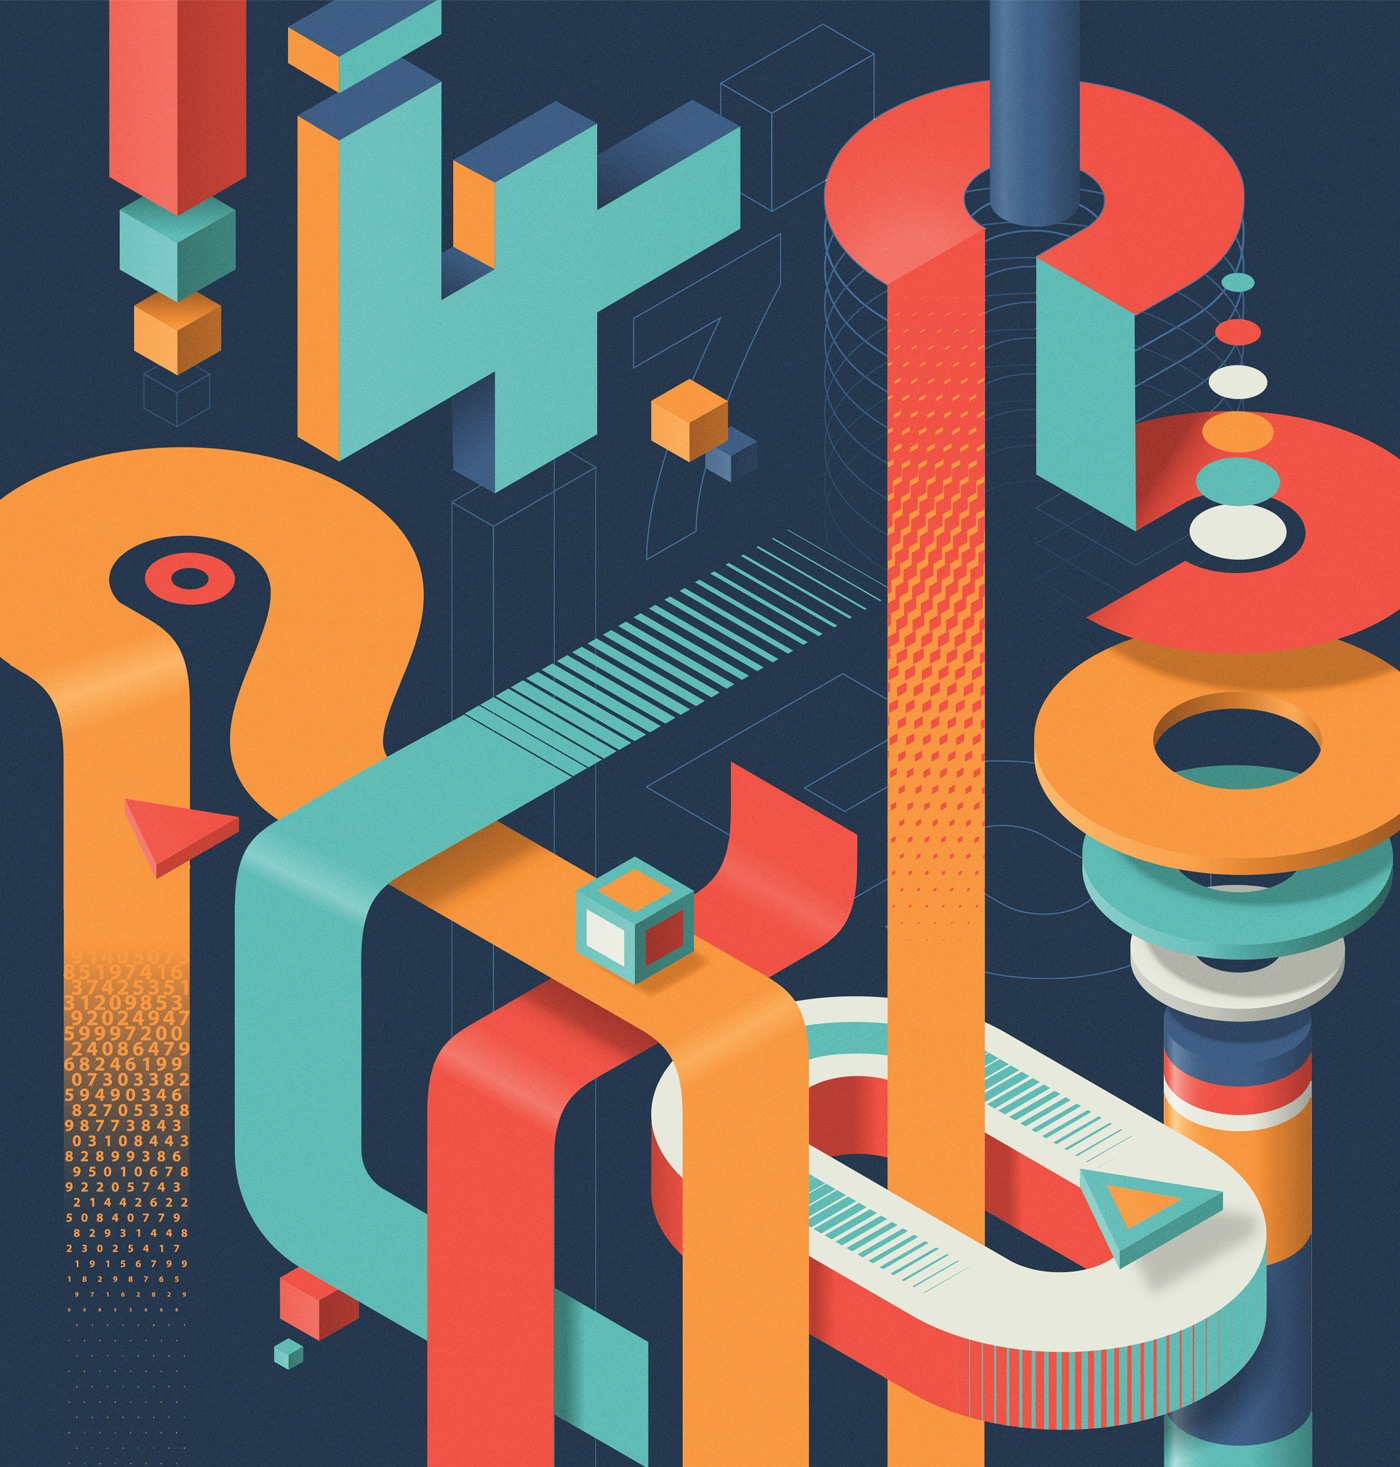 ILLUSTRATION  typography   numbers shapes new scientist print Isometric editorial science